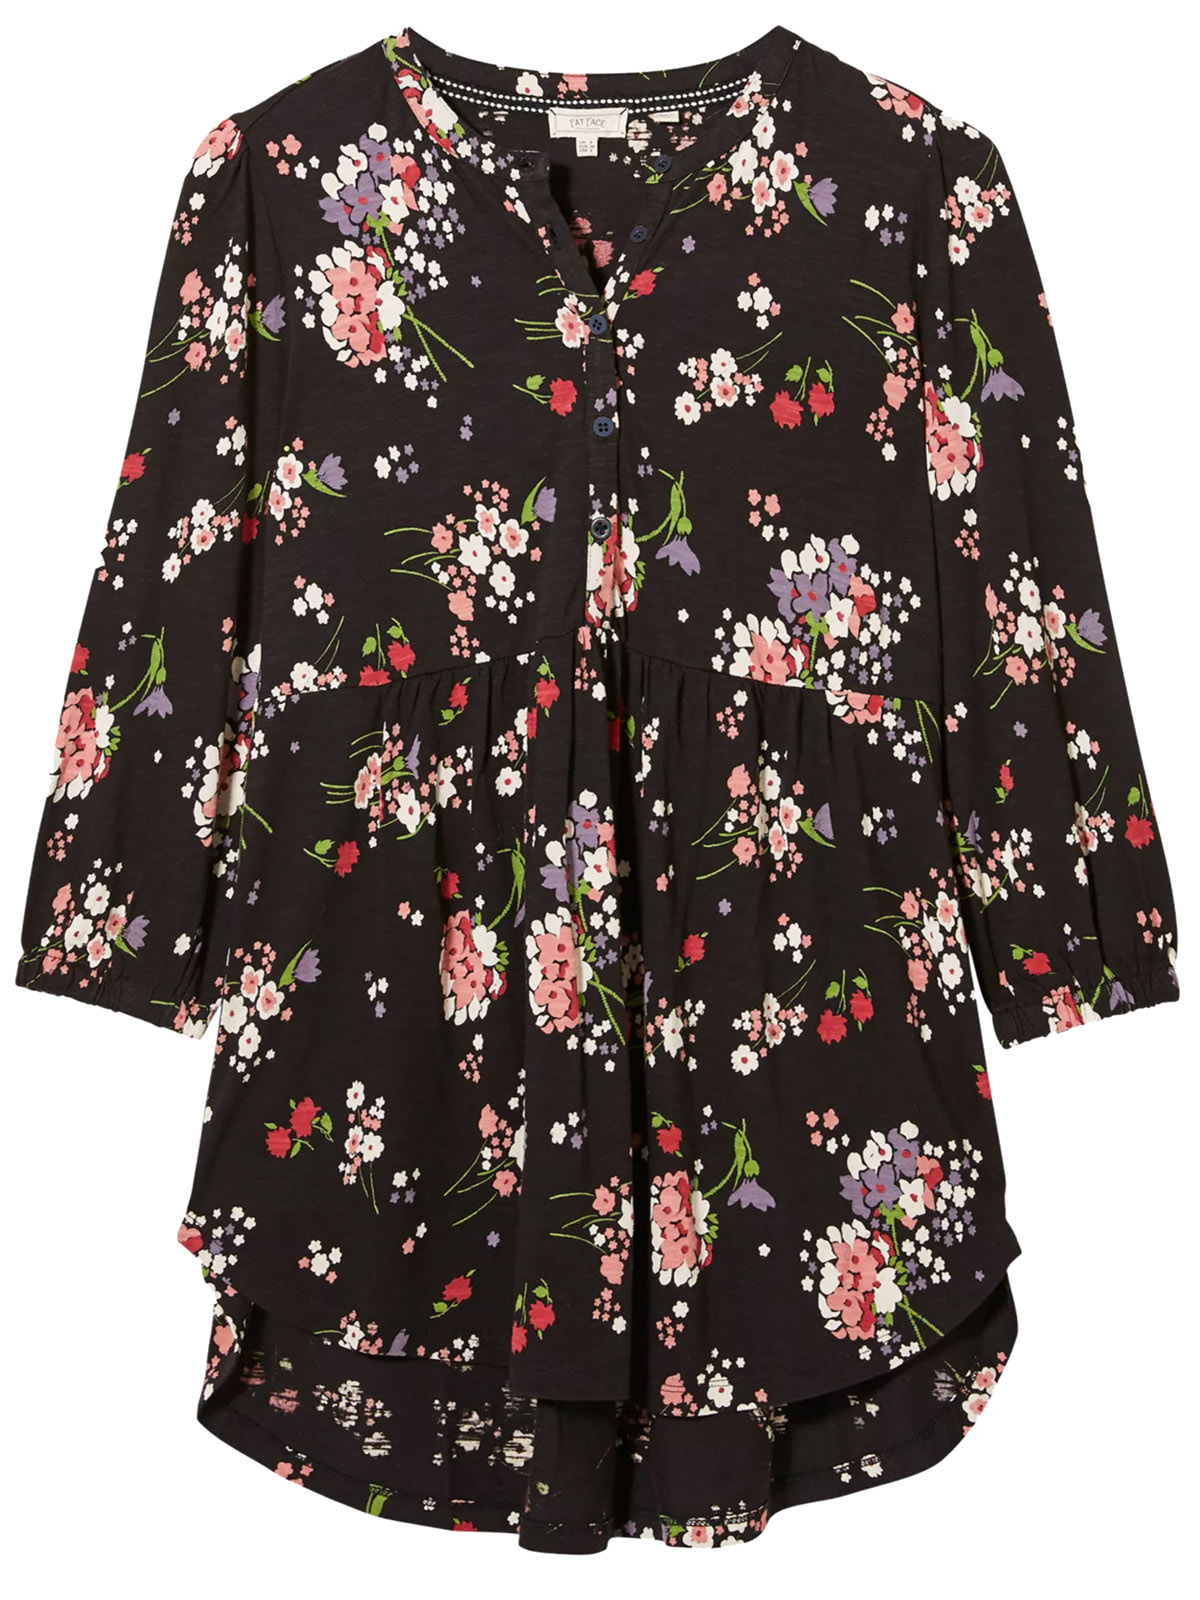 FAT FACE - - Fat Face BLACK Tabitha Spring Bouquet Blouse - Size 10 to 18